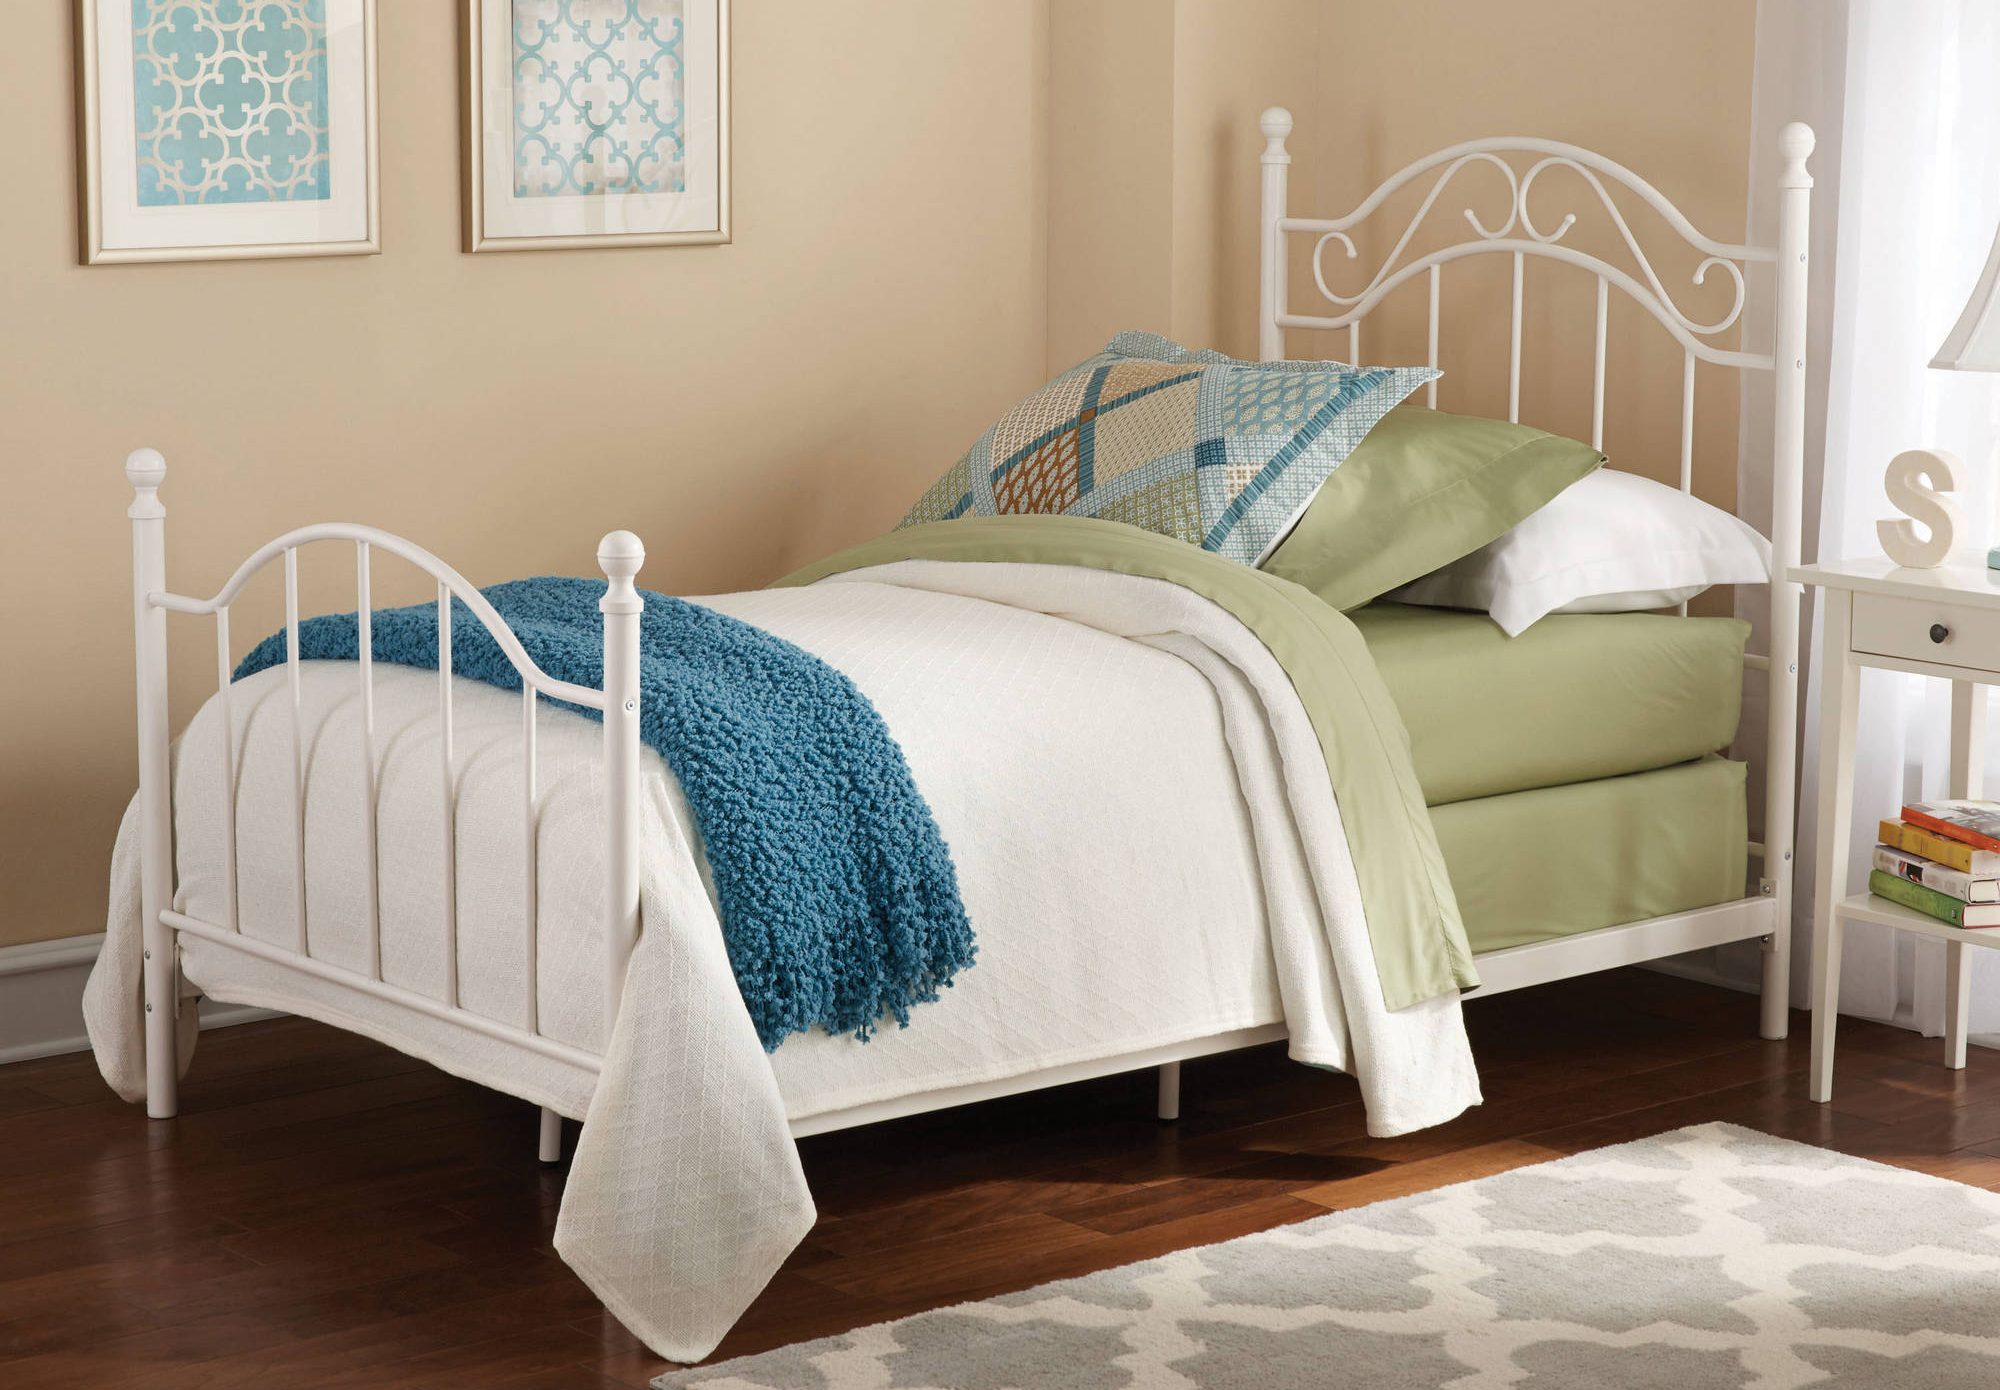 Mainstays Twin Metal Bed Only $59.00!